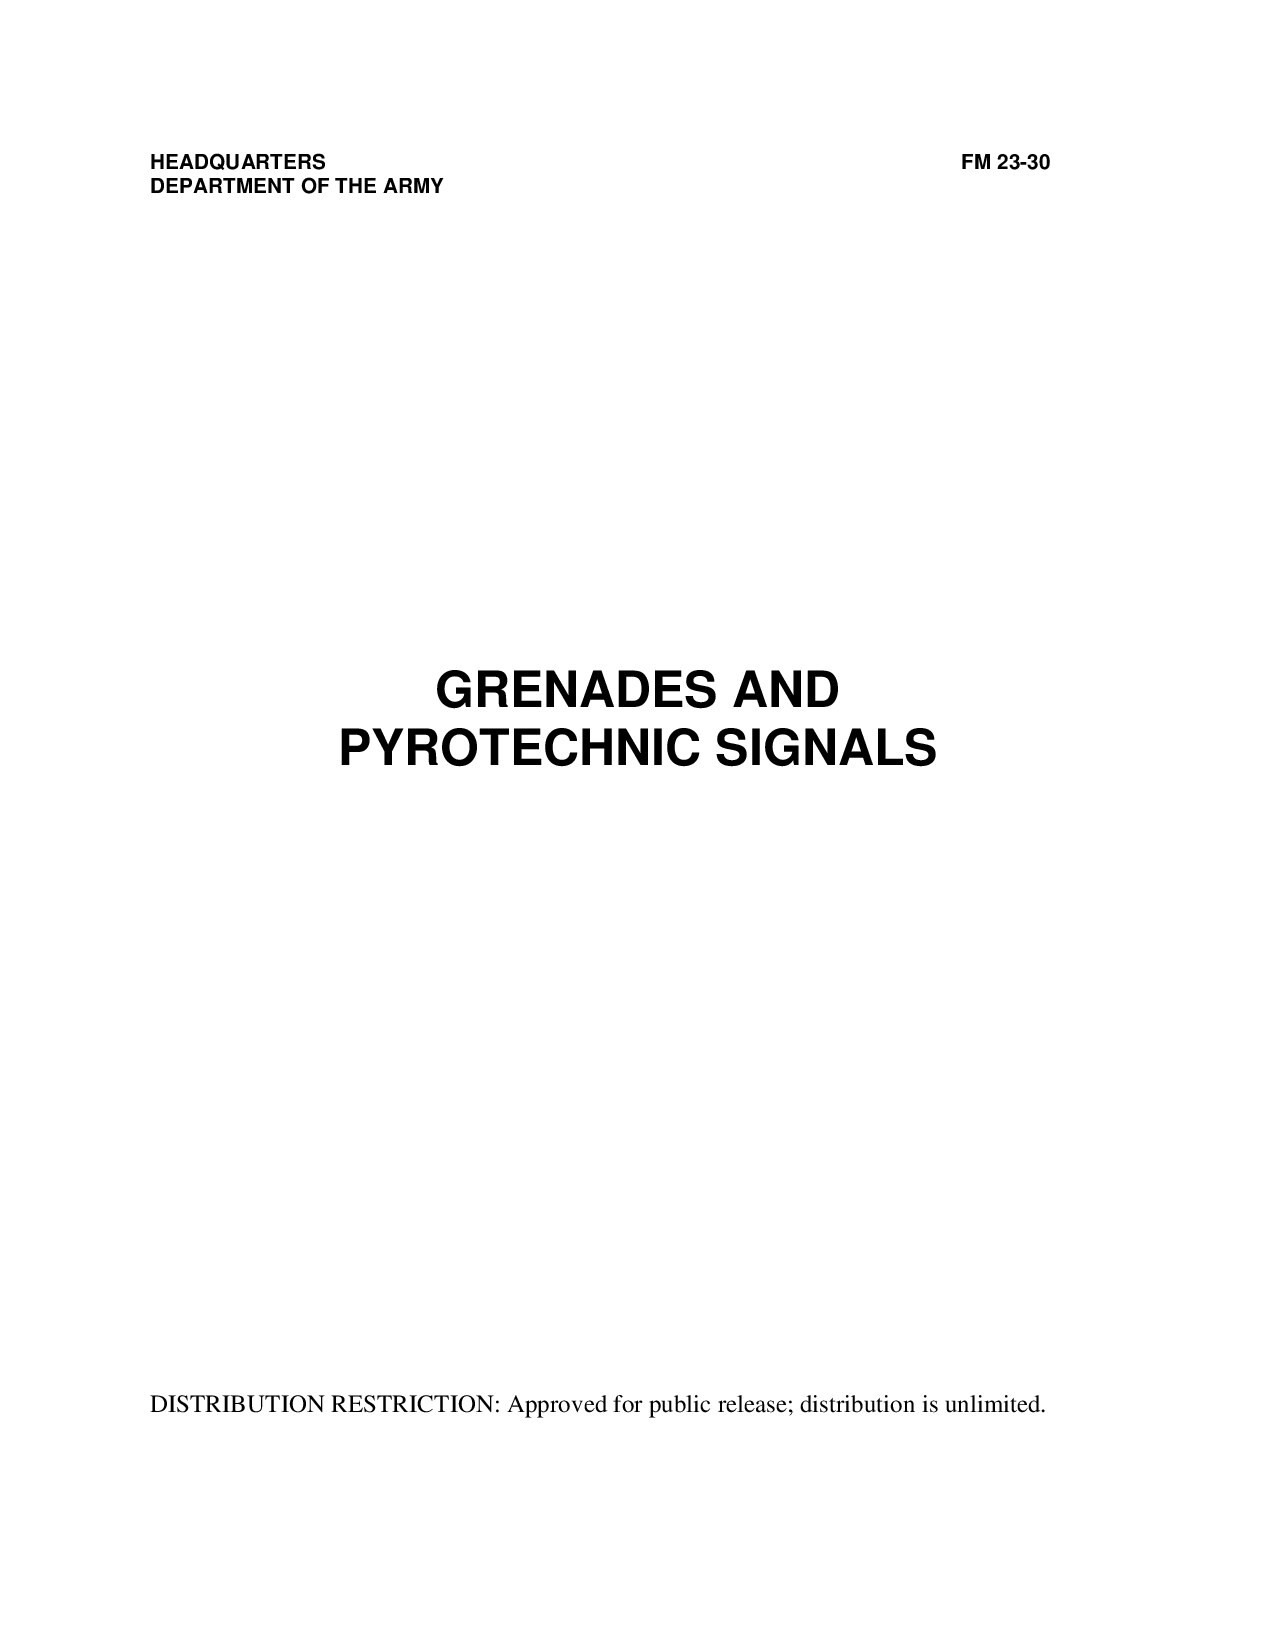 FM 3-23.30 Grenades and Pyrotechnic Signals